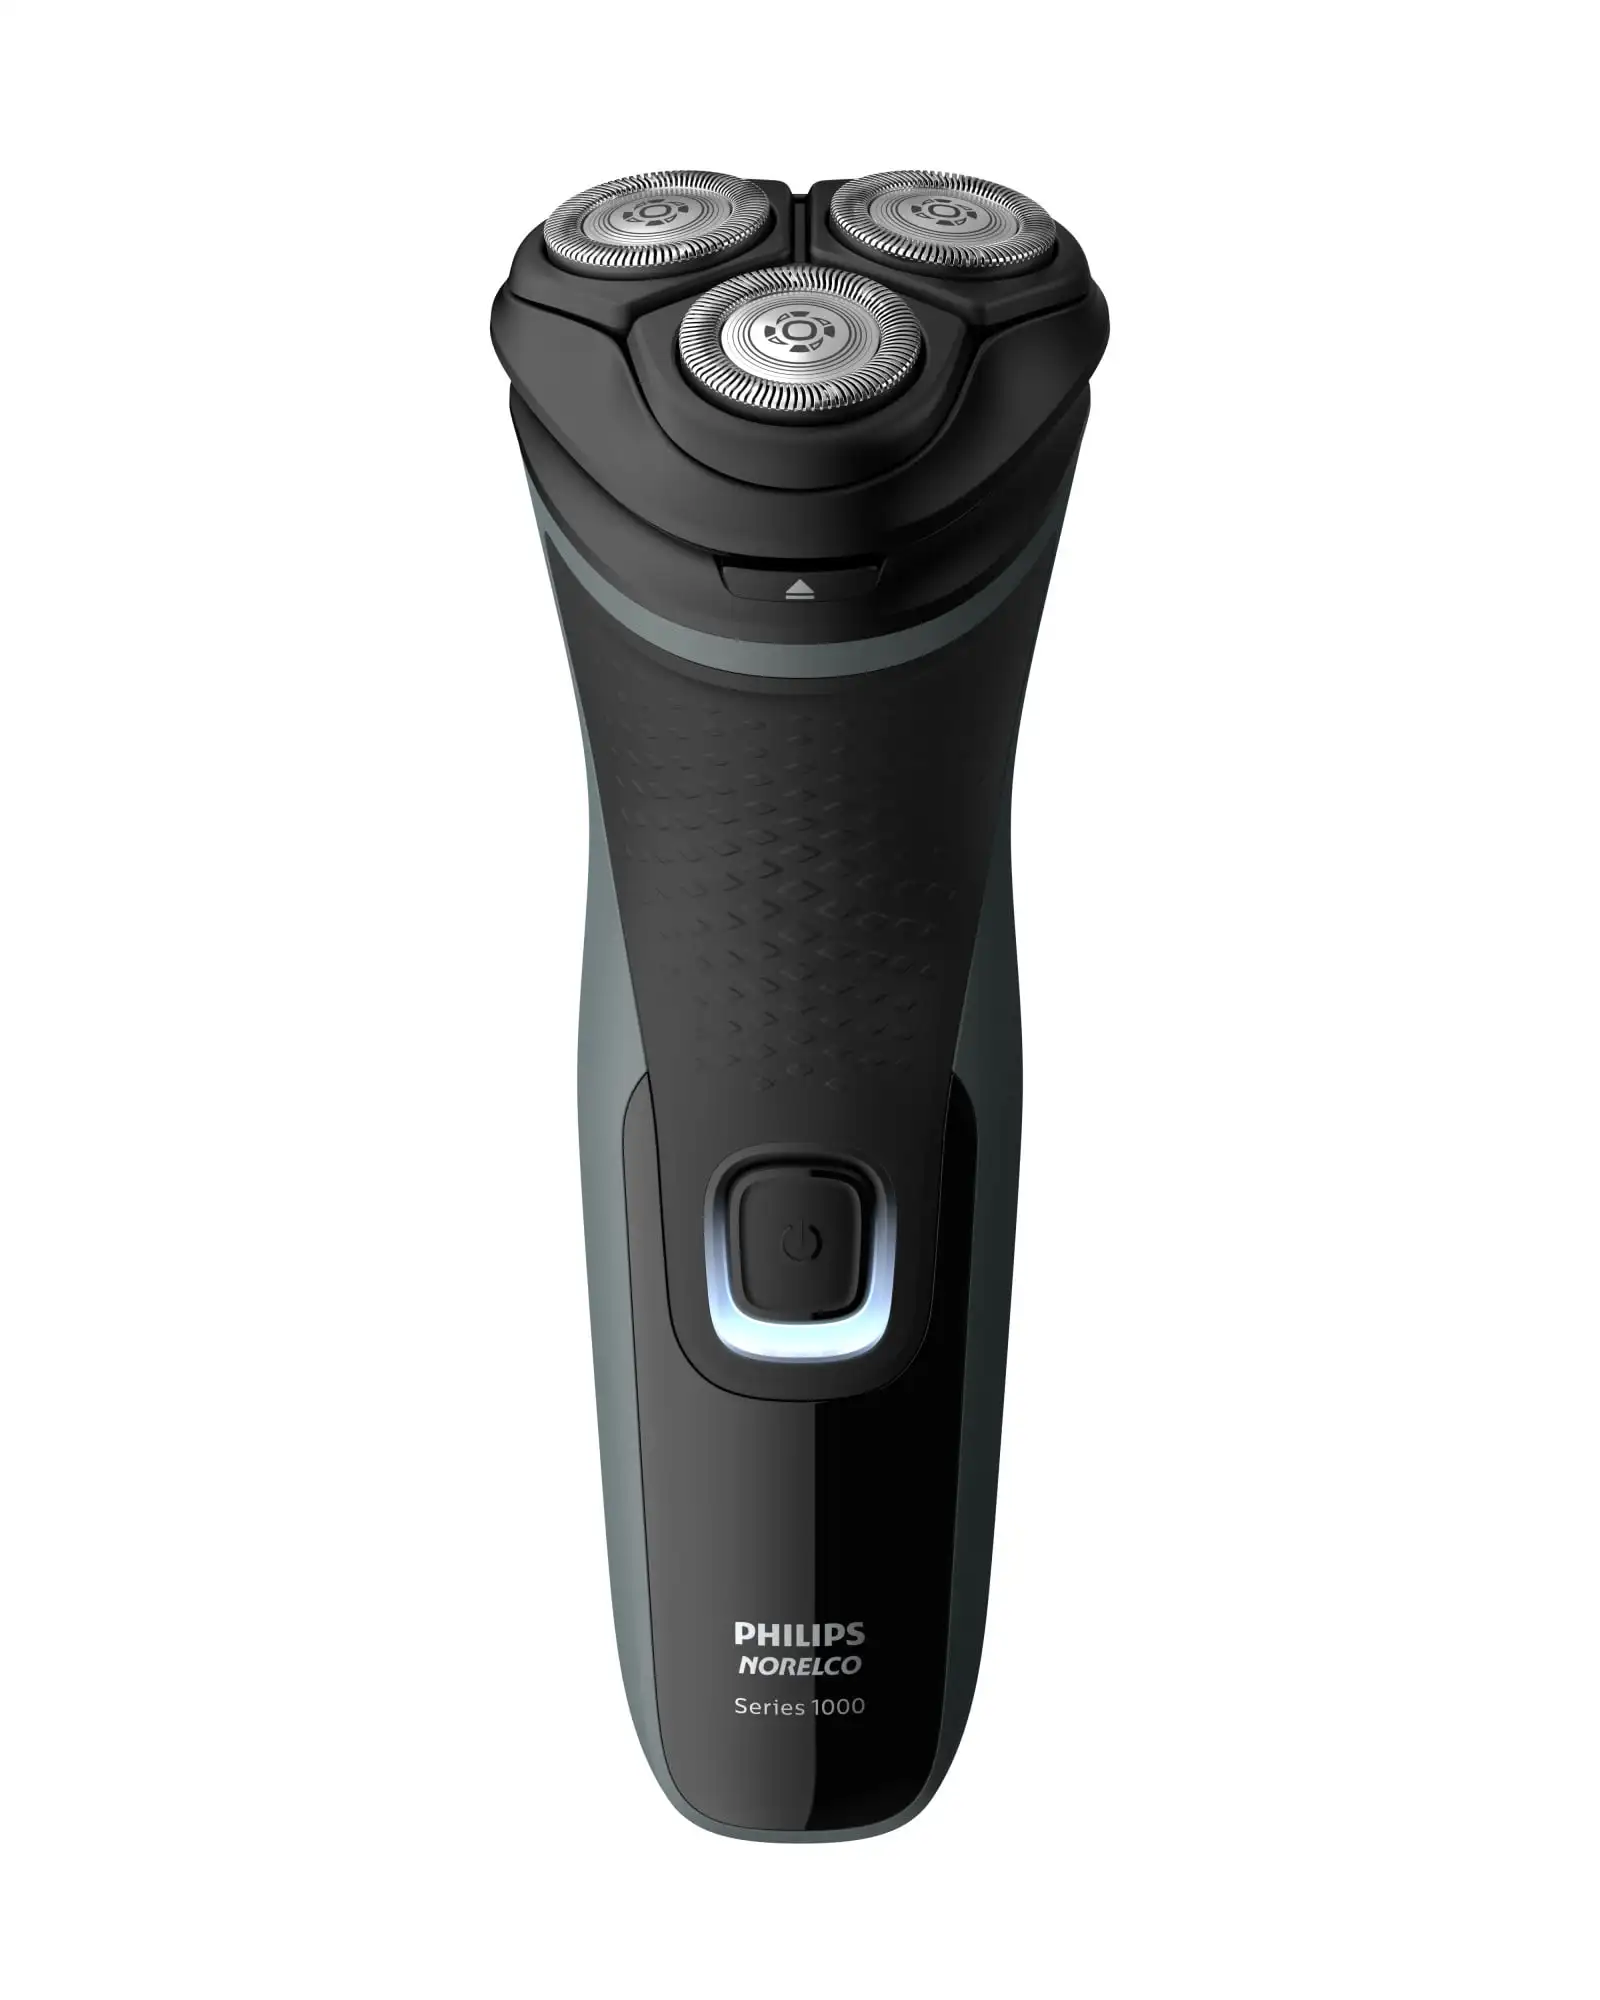 

Shaver 2300, Corded and Rechargeable Cordless Electric Shaver with Pop-Up Trimmer, S1211/81